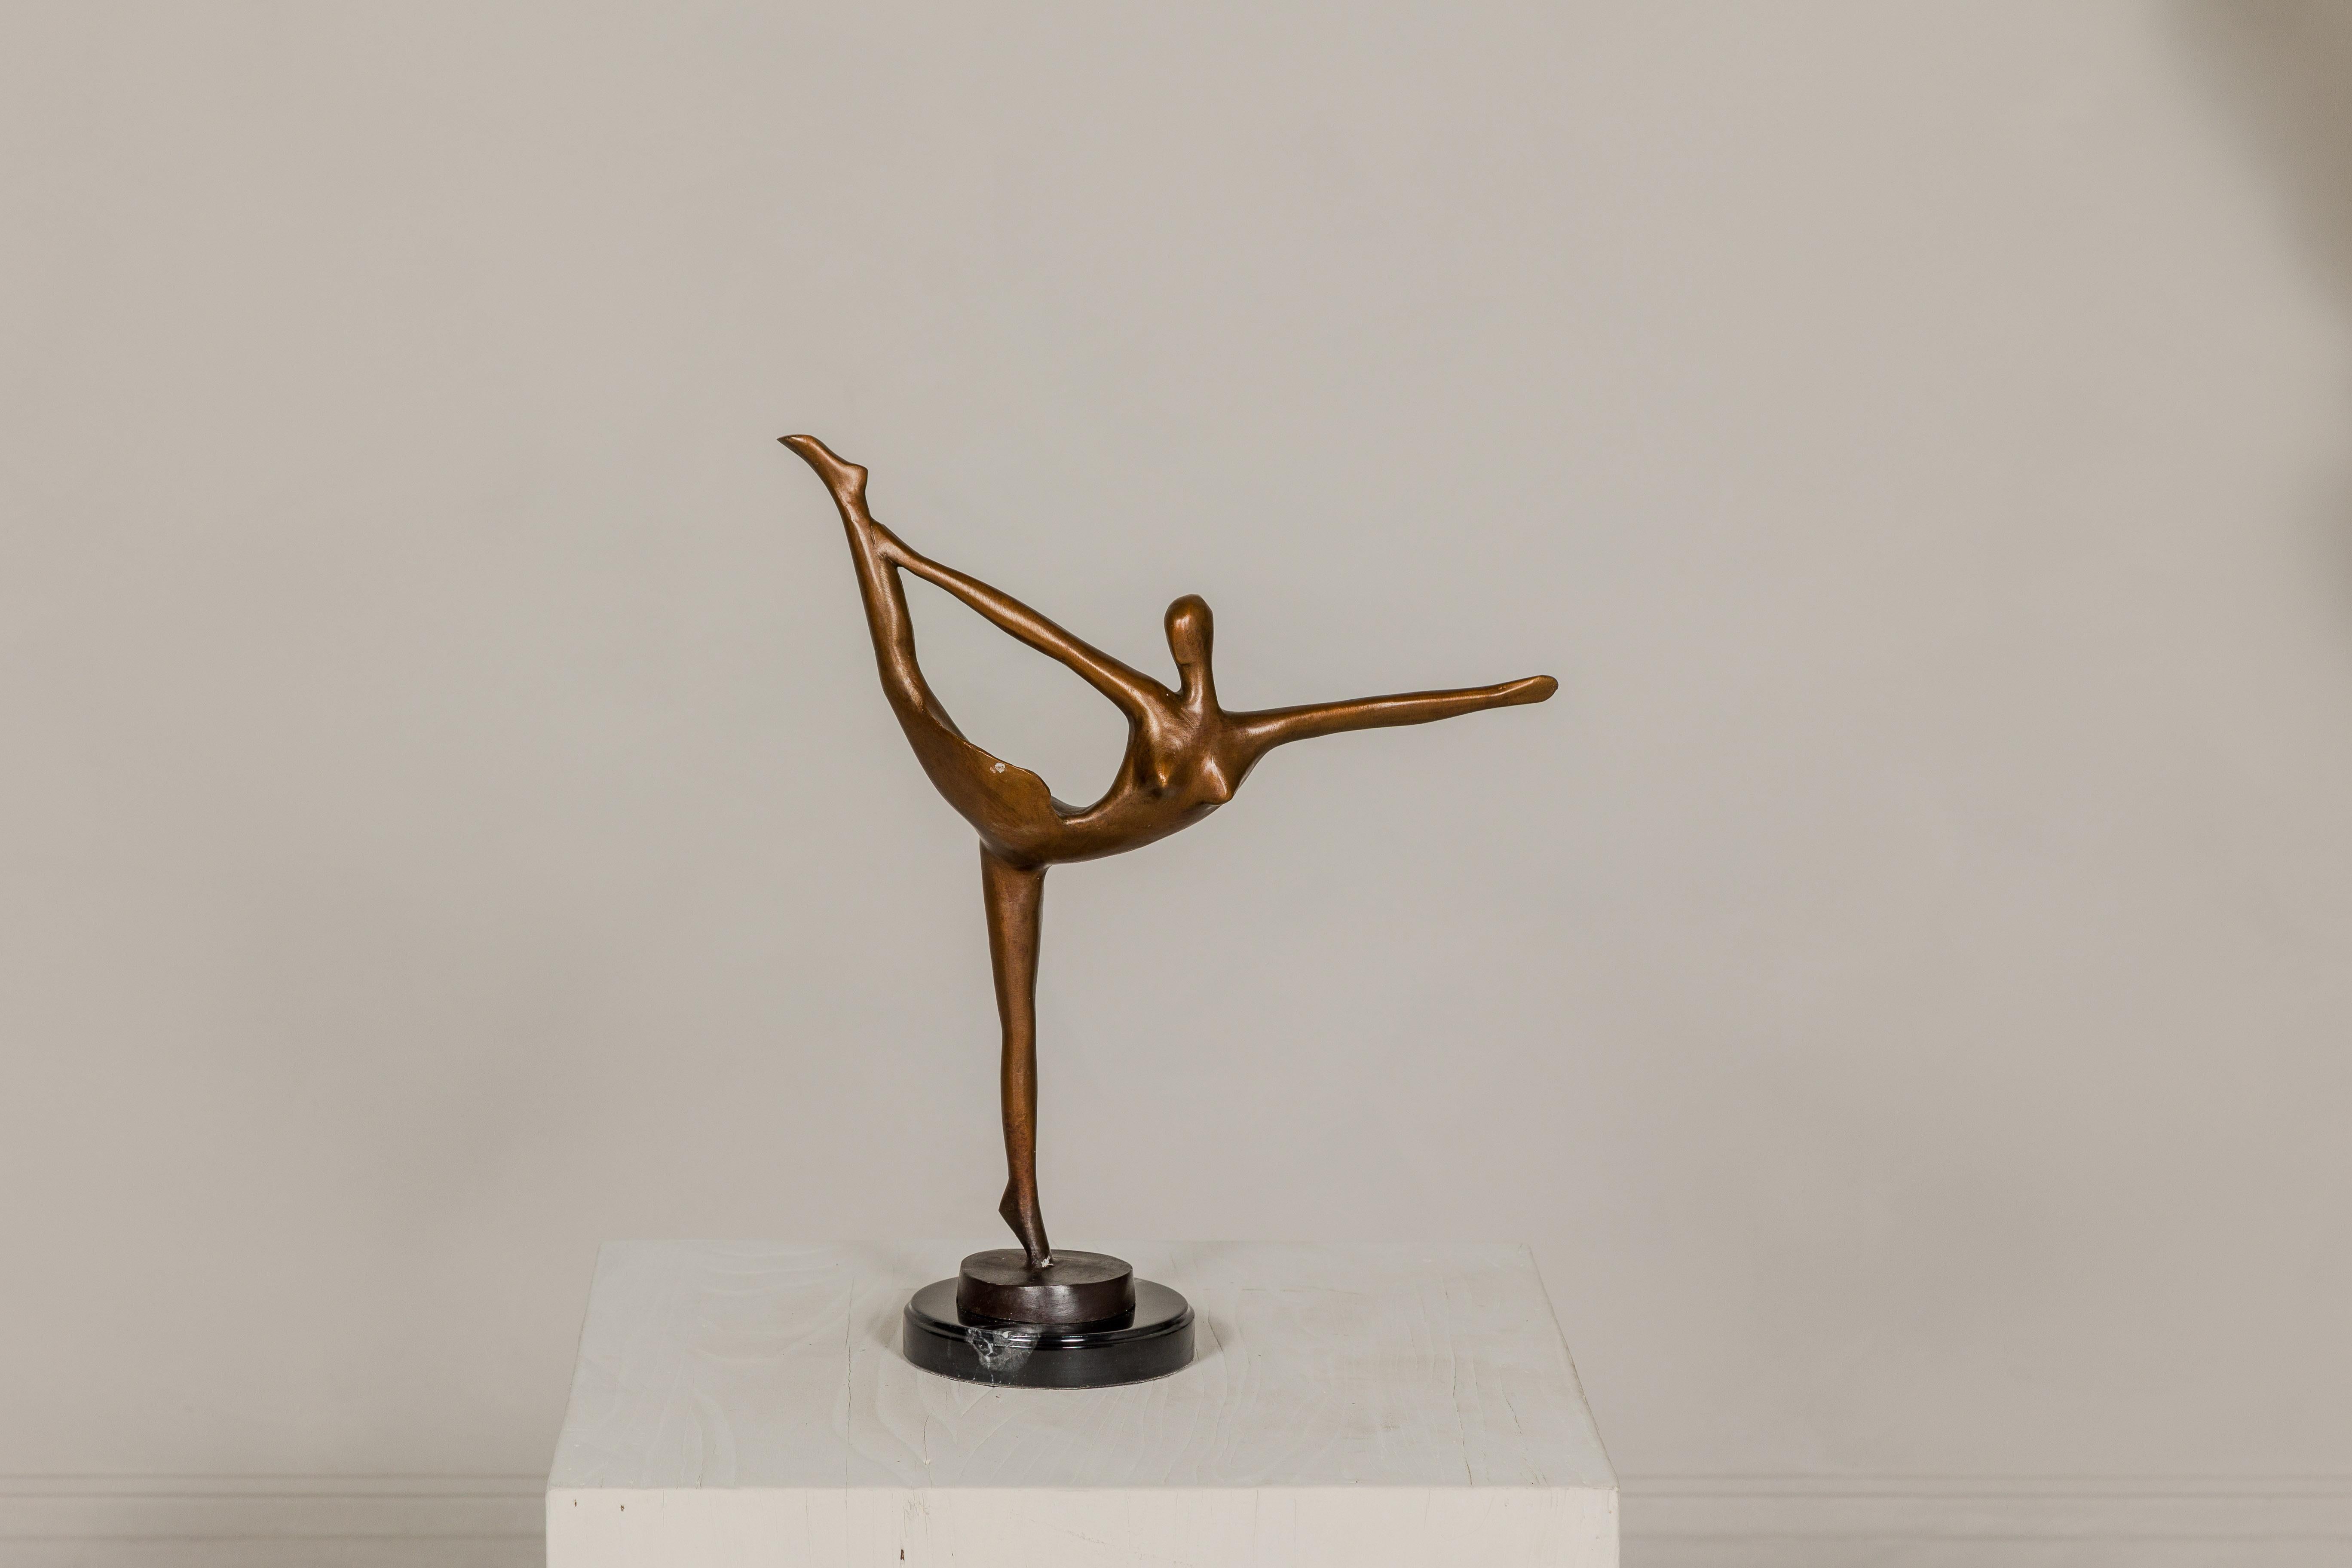 A bronze ballerina statuette on circular black marble base with white veining. Enhance your home's décor with the captivating grace of this exquisite bronze ballerina statuette, poised on a circular black marble base with white veining. Its elegant